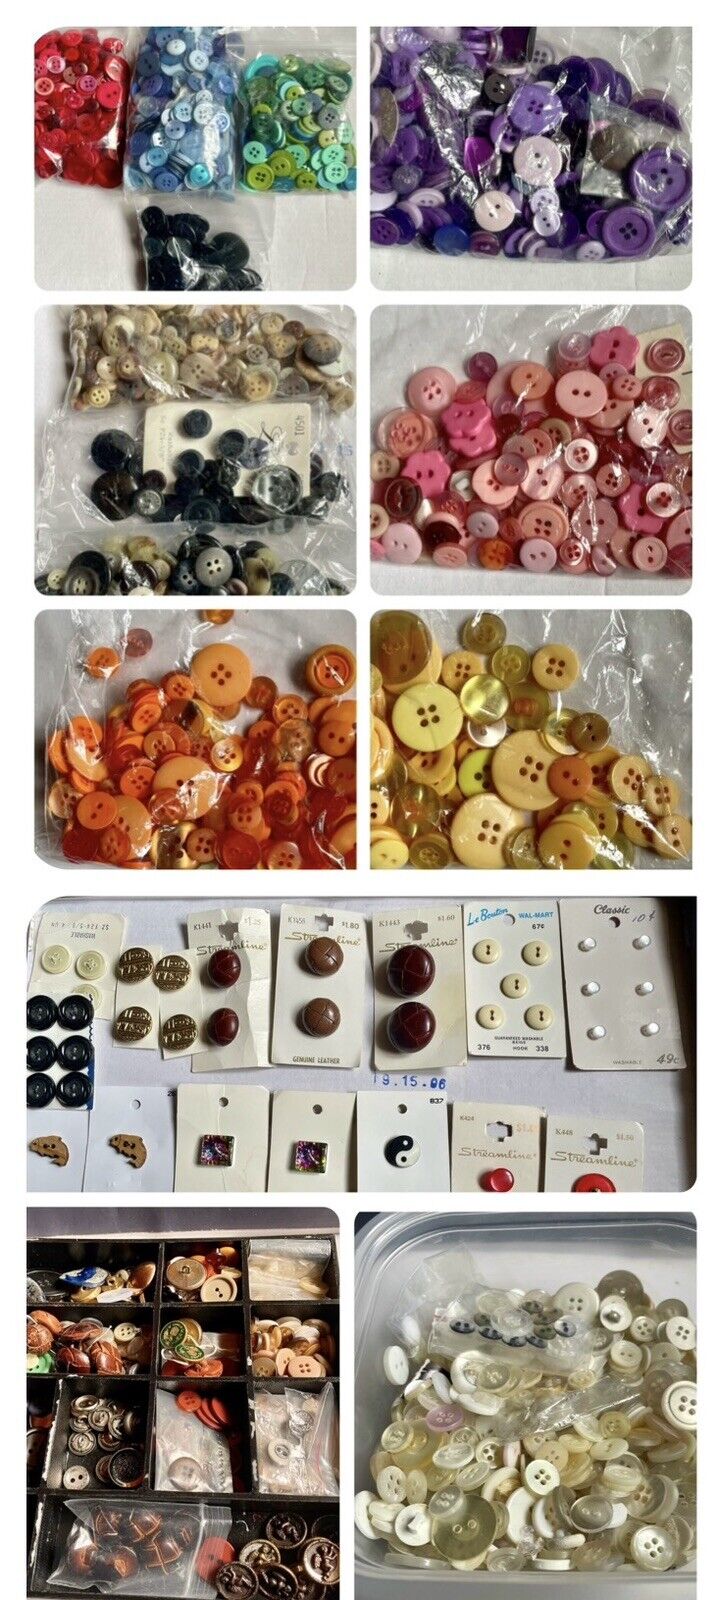 Vintage Buttons Lot 3 Lb Separated By Color - Very Nice Lot